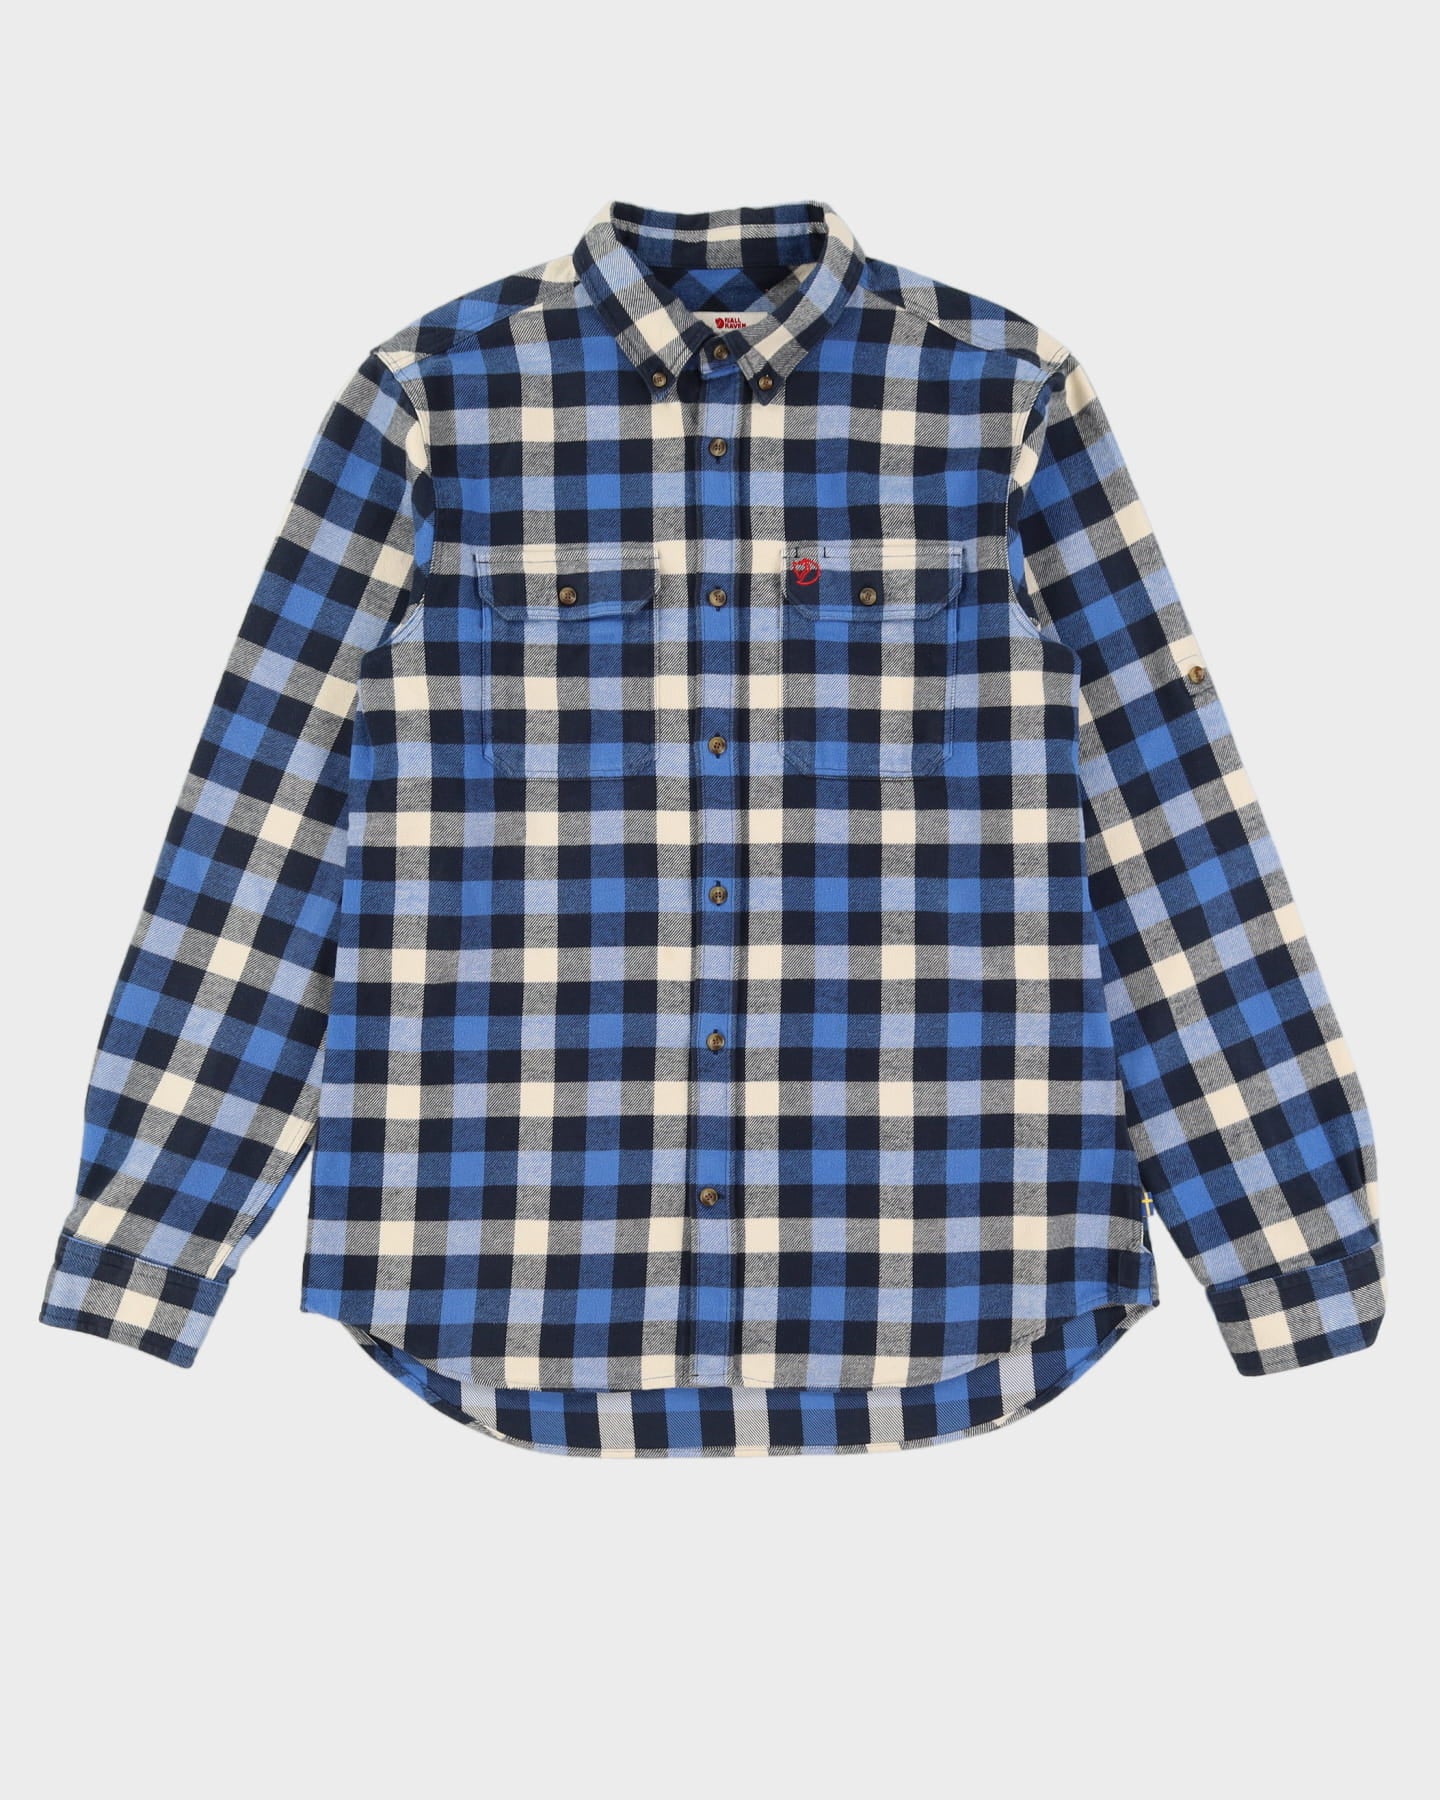 Fjallraven Blue / White Slim Fit Check Pattered Long Sleeve Flannel Shirt - XL